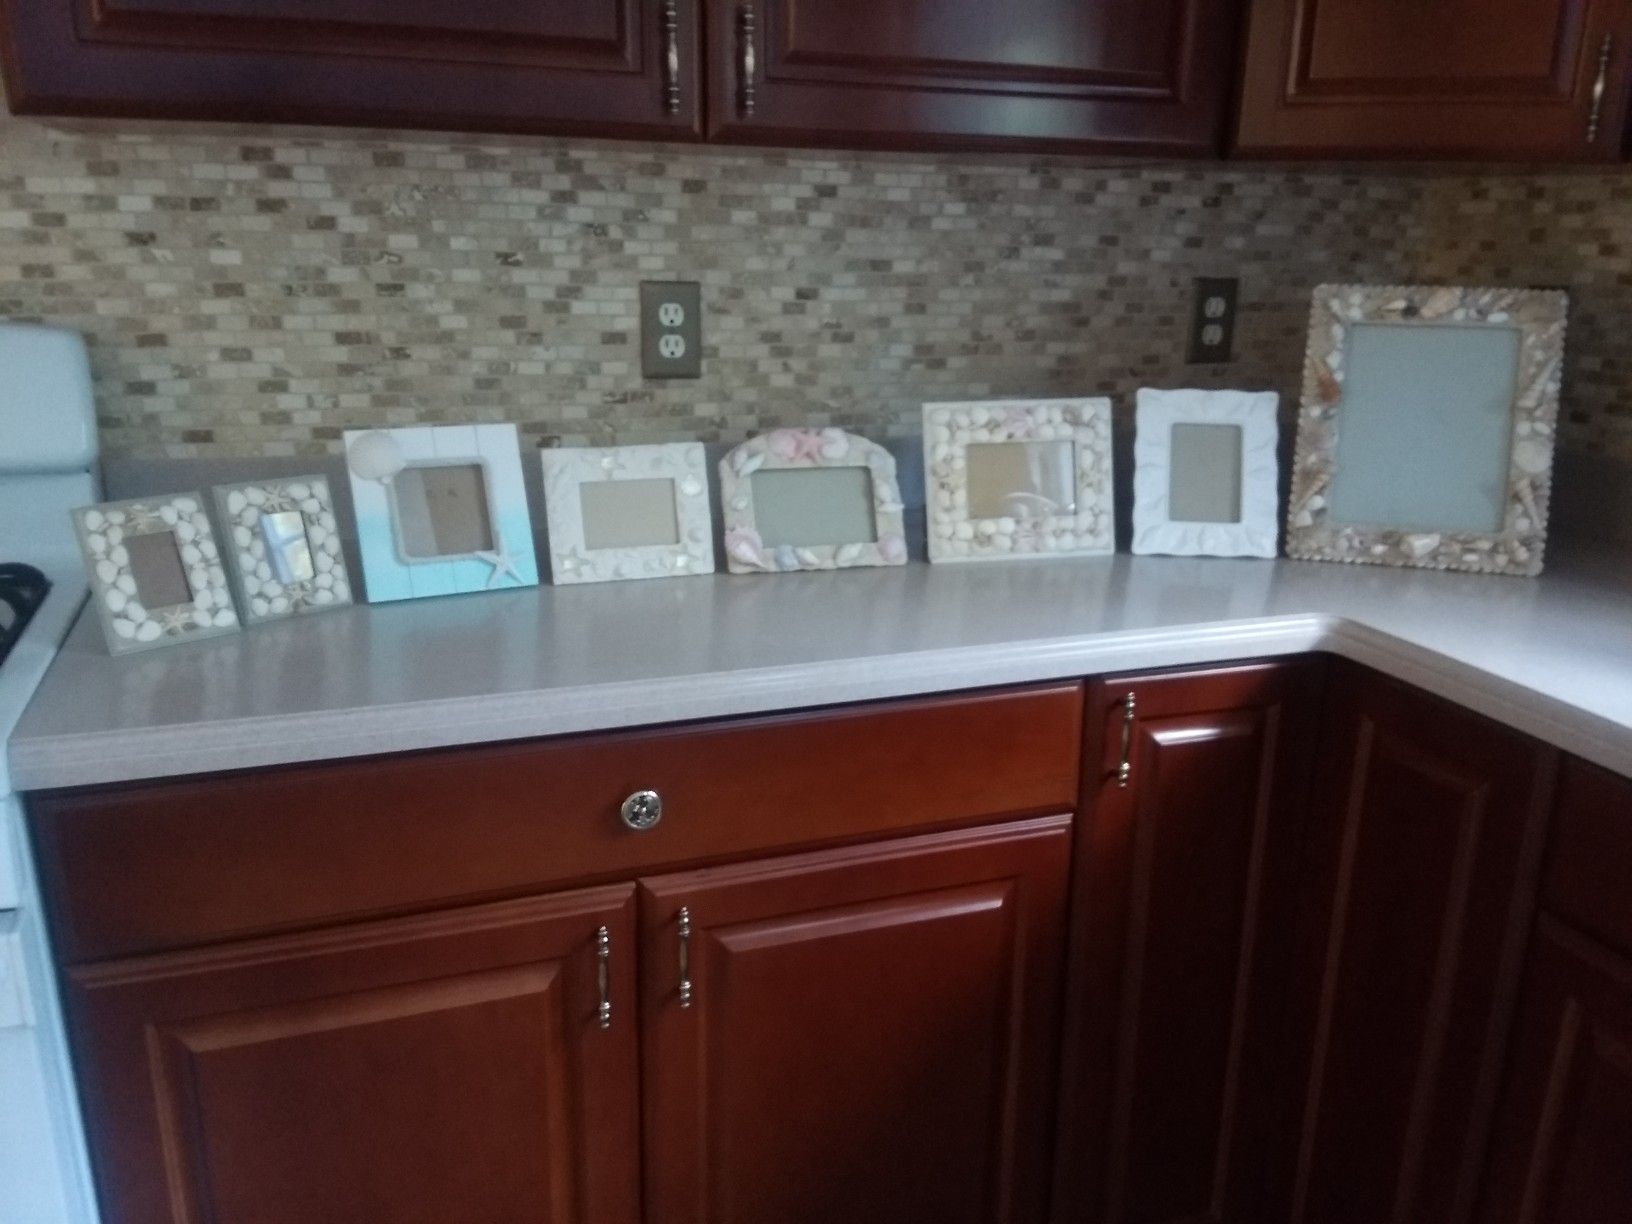 Seashell picture frames